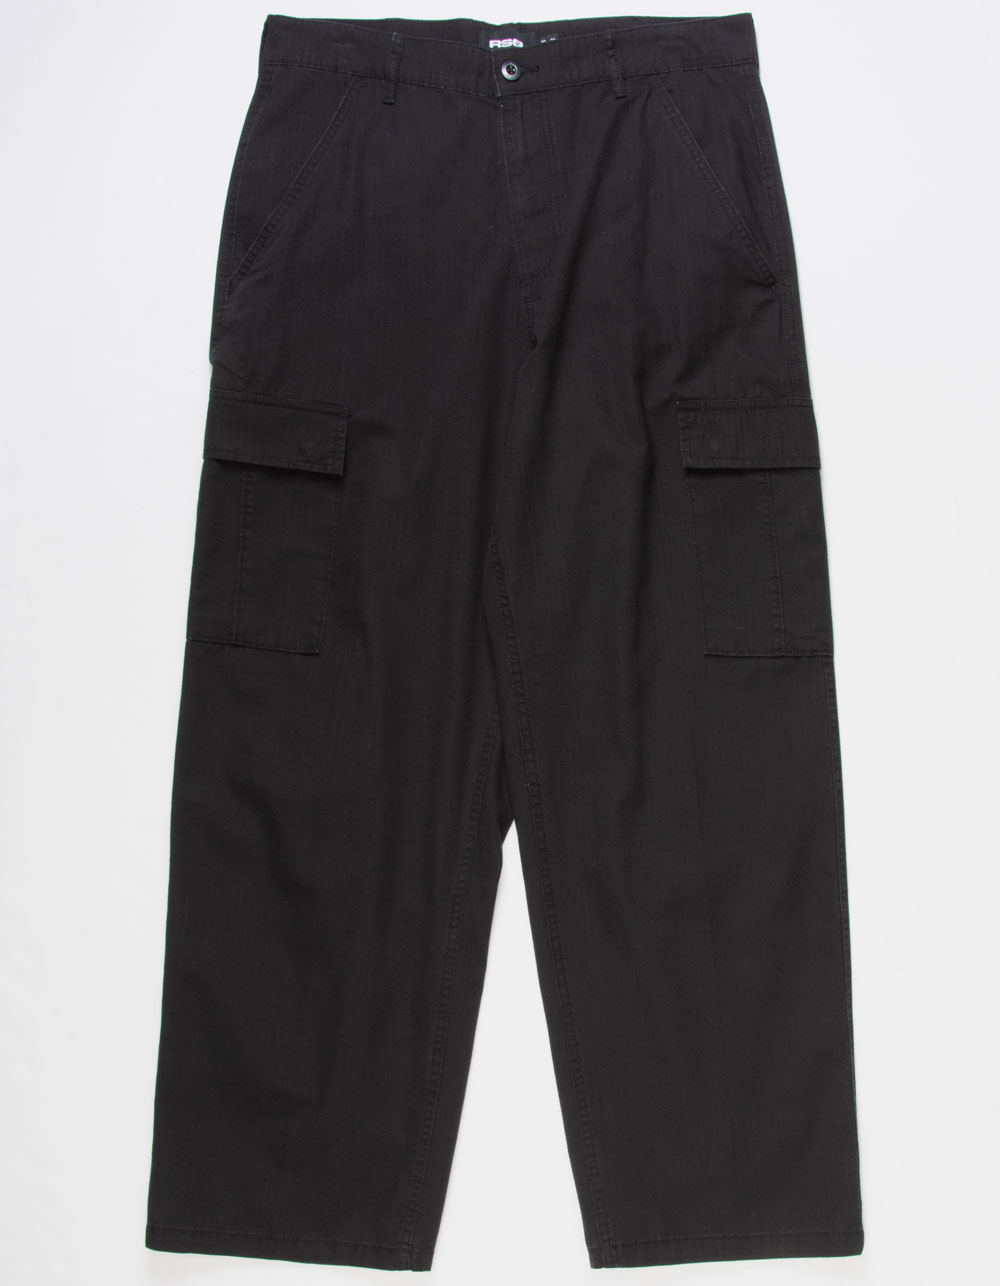 RSQ Mens Loose Cargo Ripstop Pants